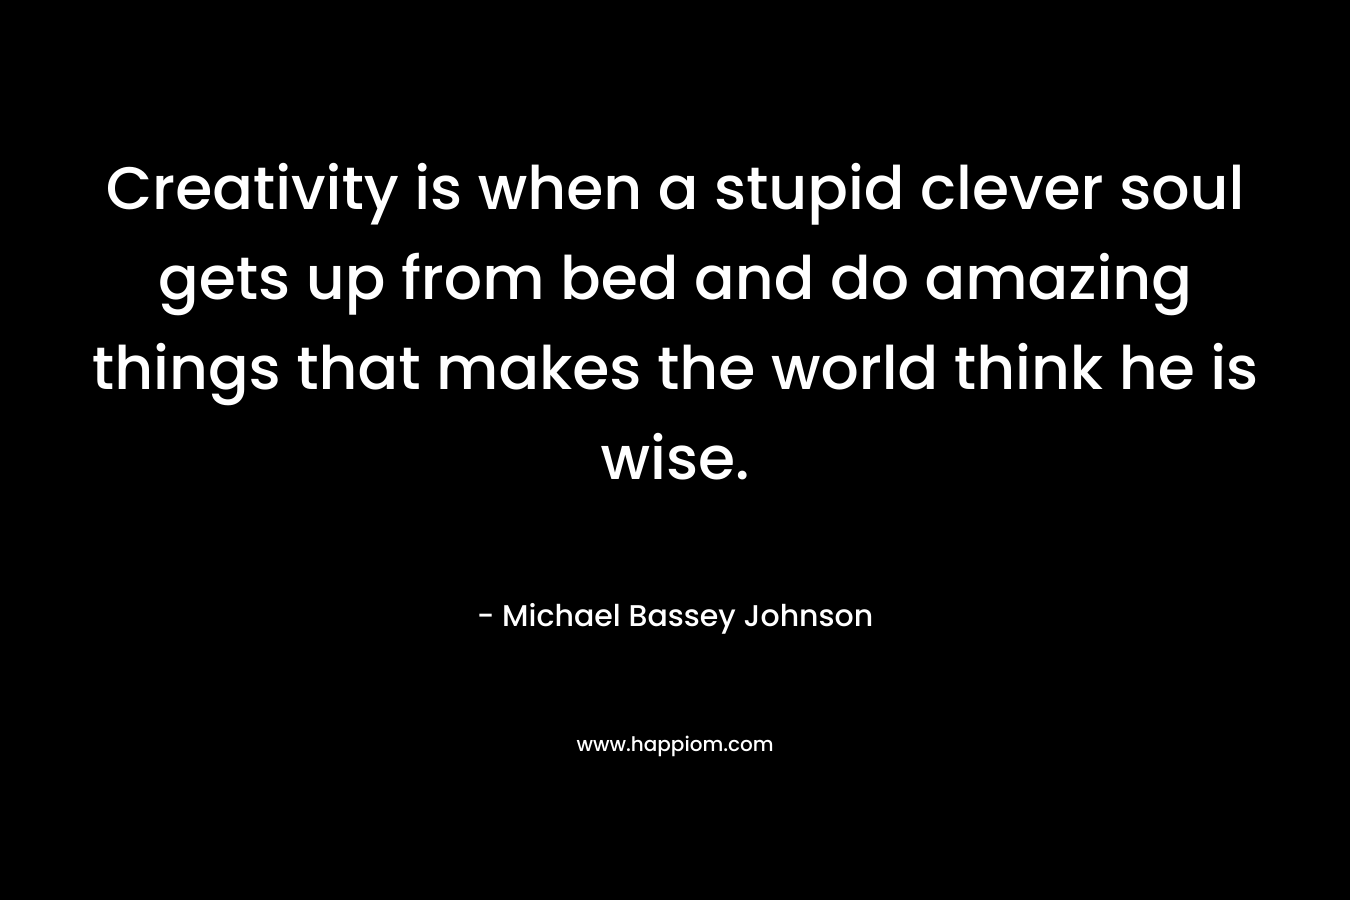 Creativity is when a stupid clever soul gets up from bed and do amazing things that makes the world think he is wise.